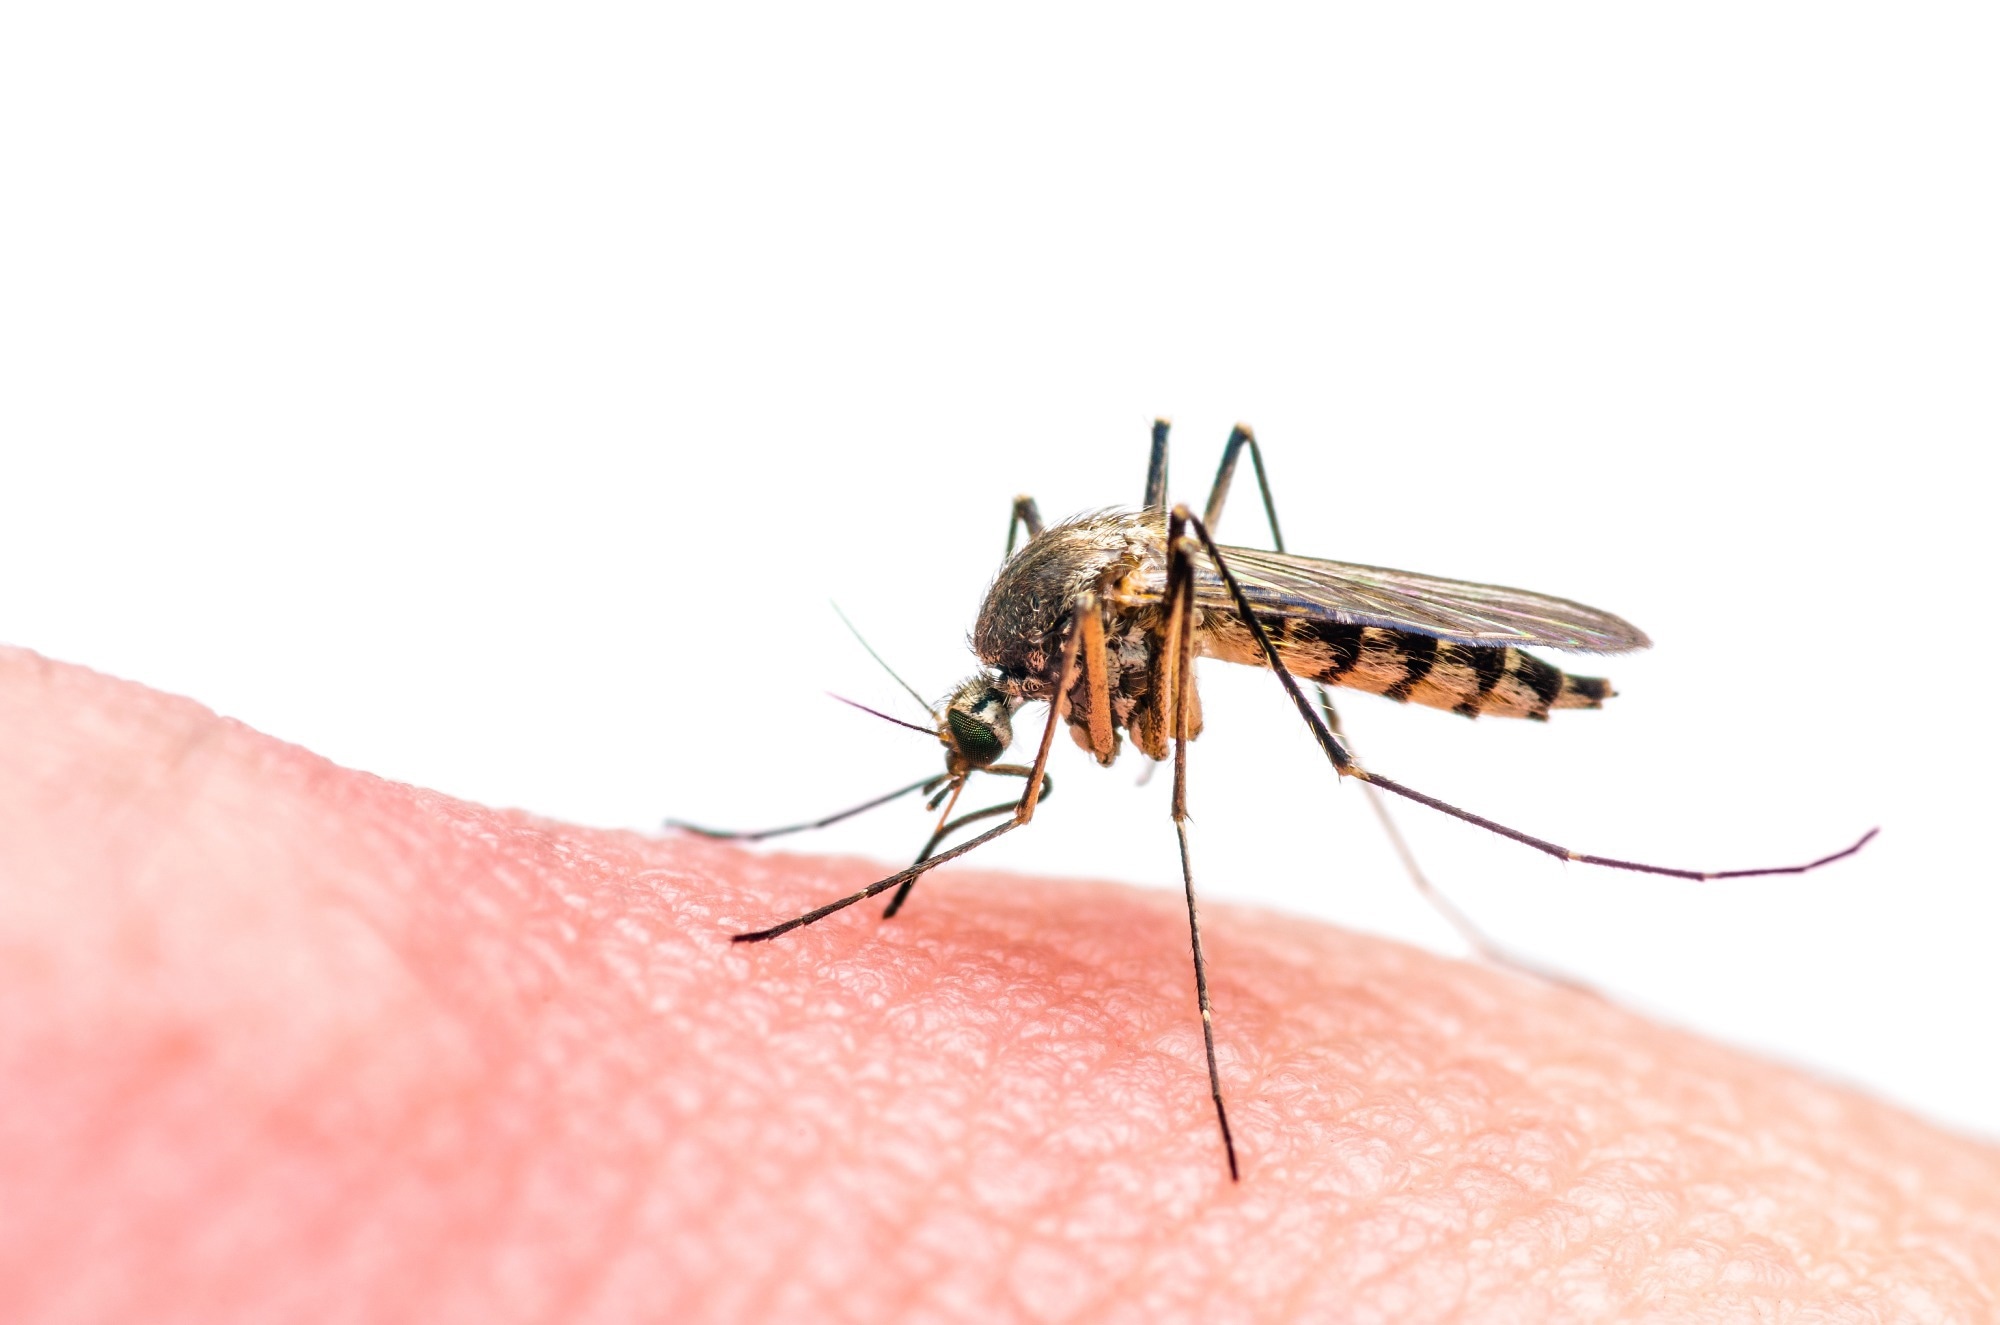 Study: Exploring the immunogenicity of an insect-specific virus vectored Zika vaccine candidate. Image Credit: nechaevkon/Shutterstock.com